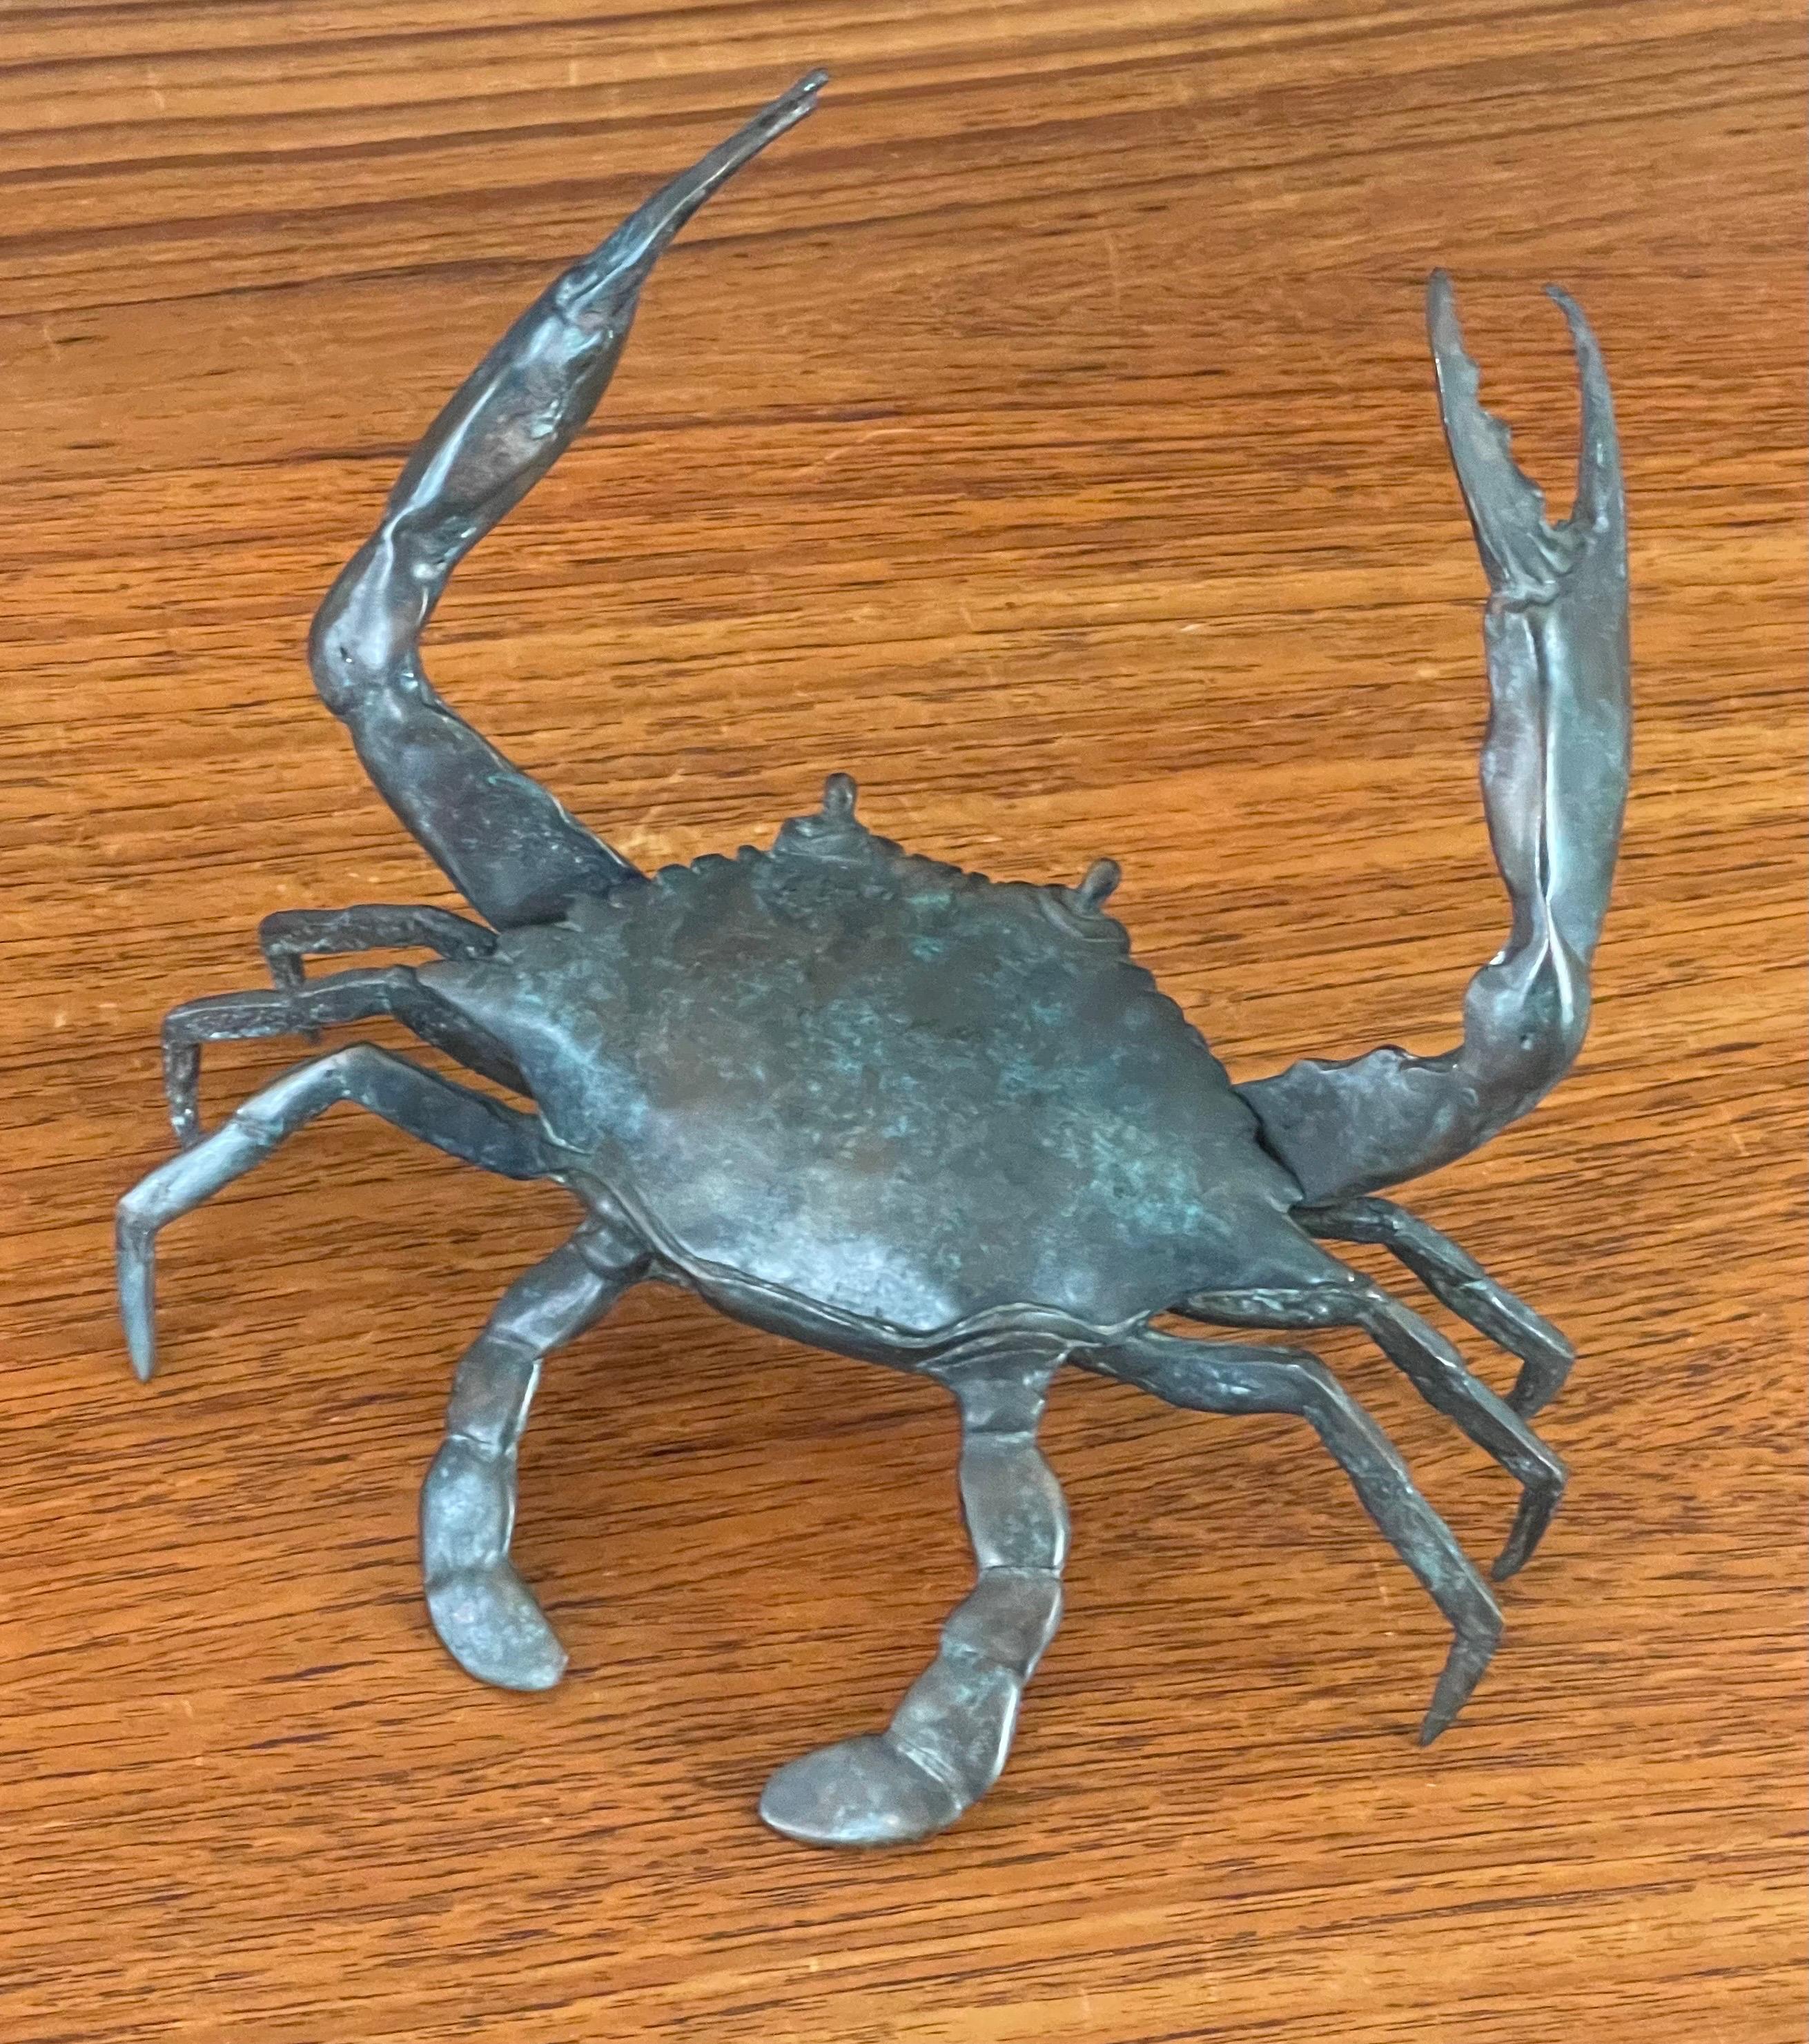 A well detailed and patinated articulated bronze crab sculpture, circa 1970s. The piece is in very good vintage condition and measures 8